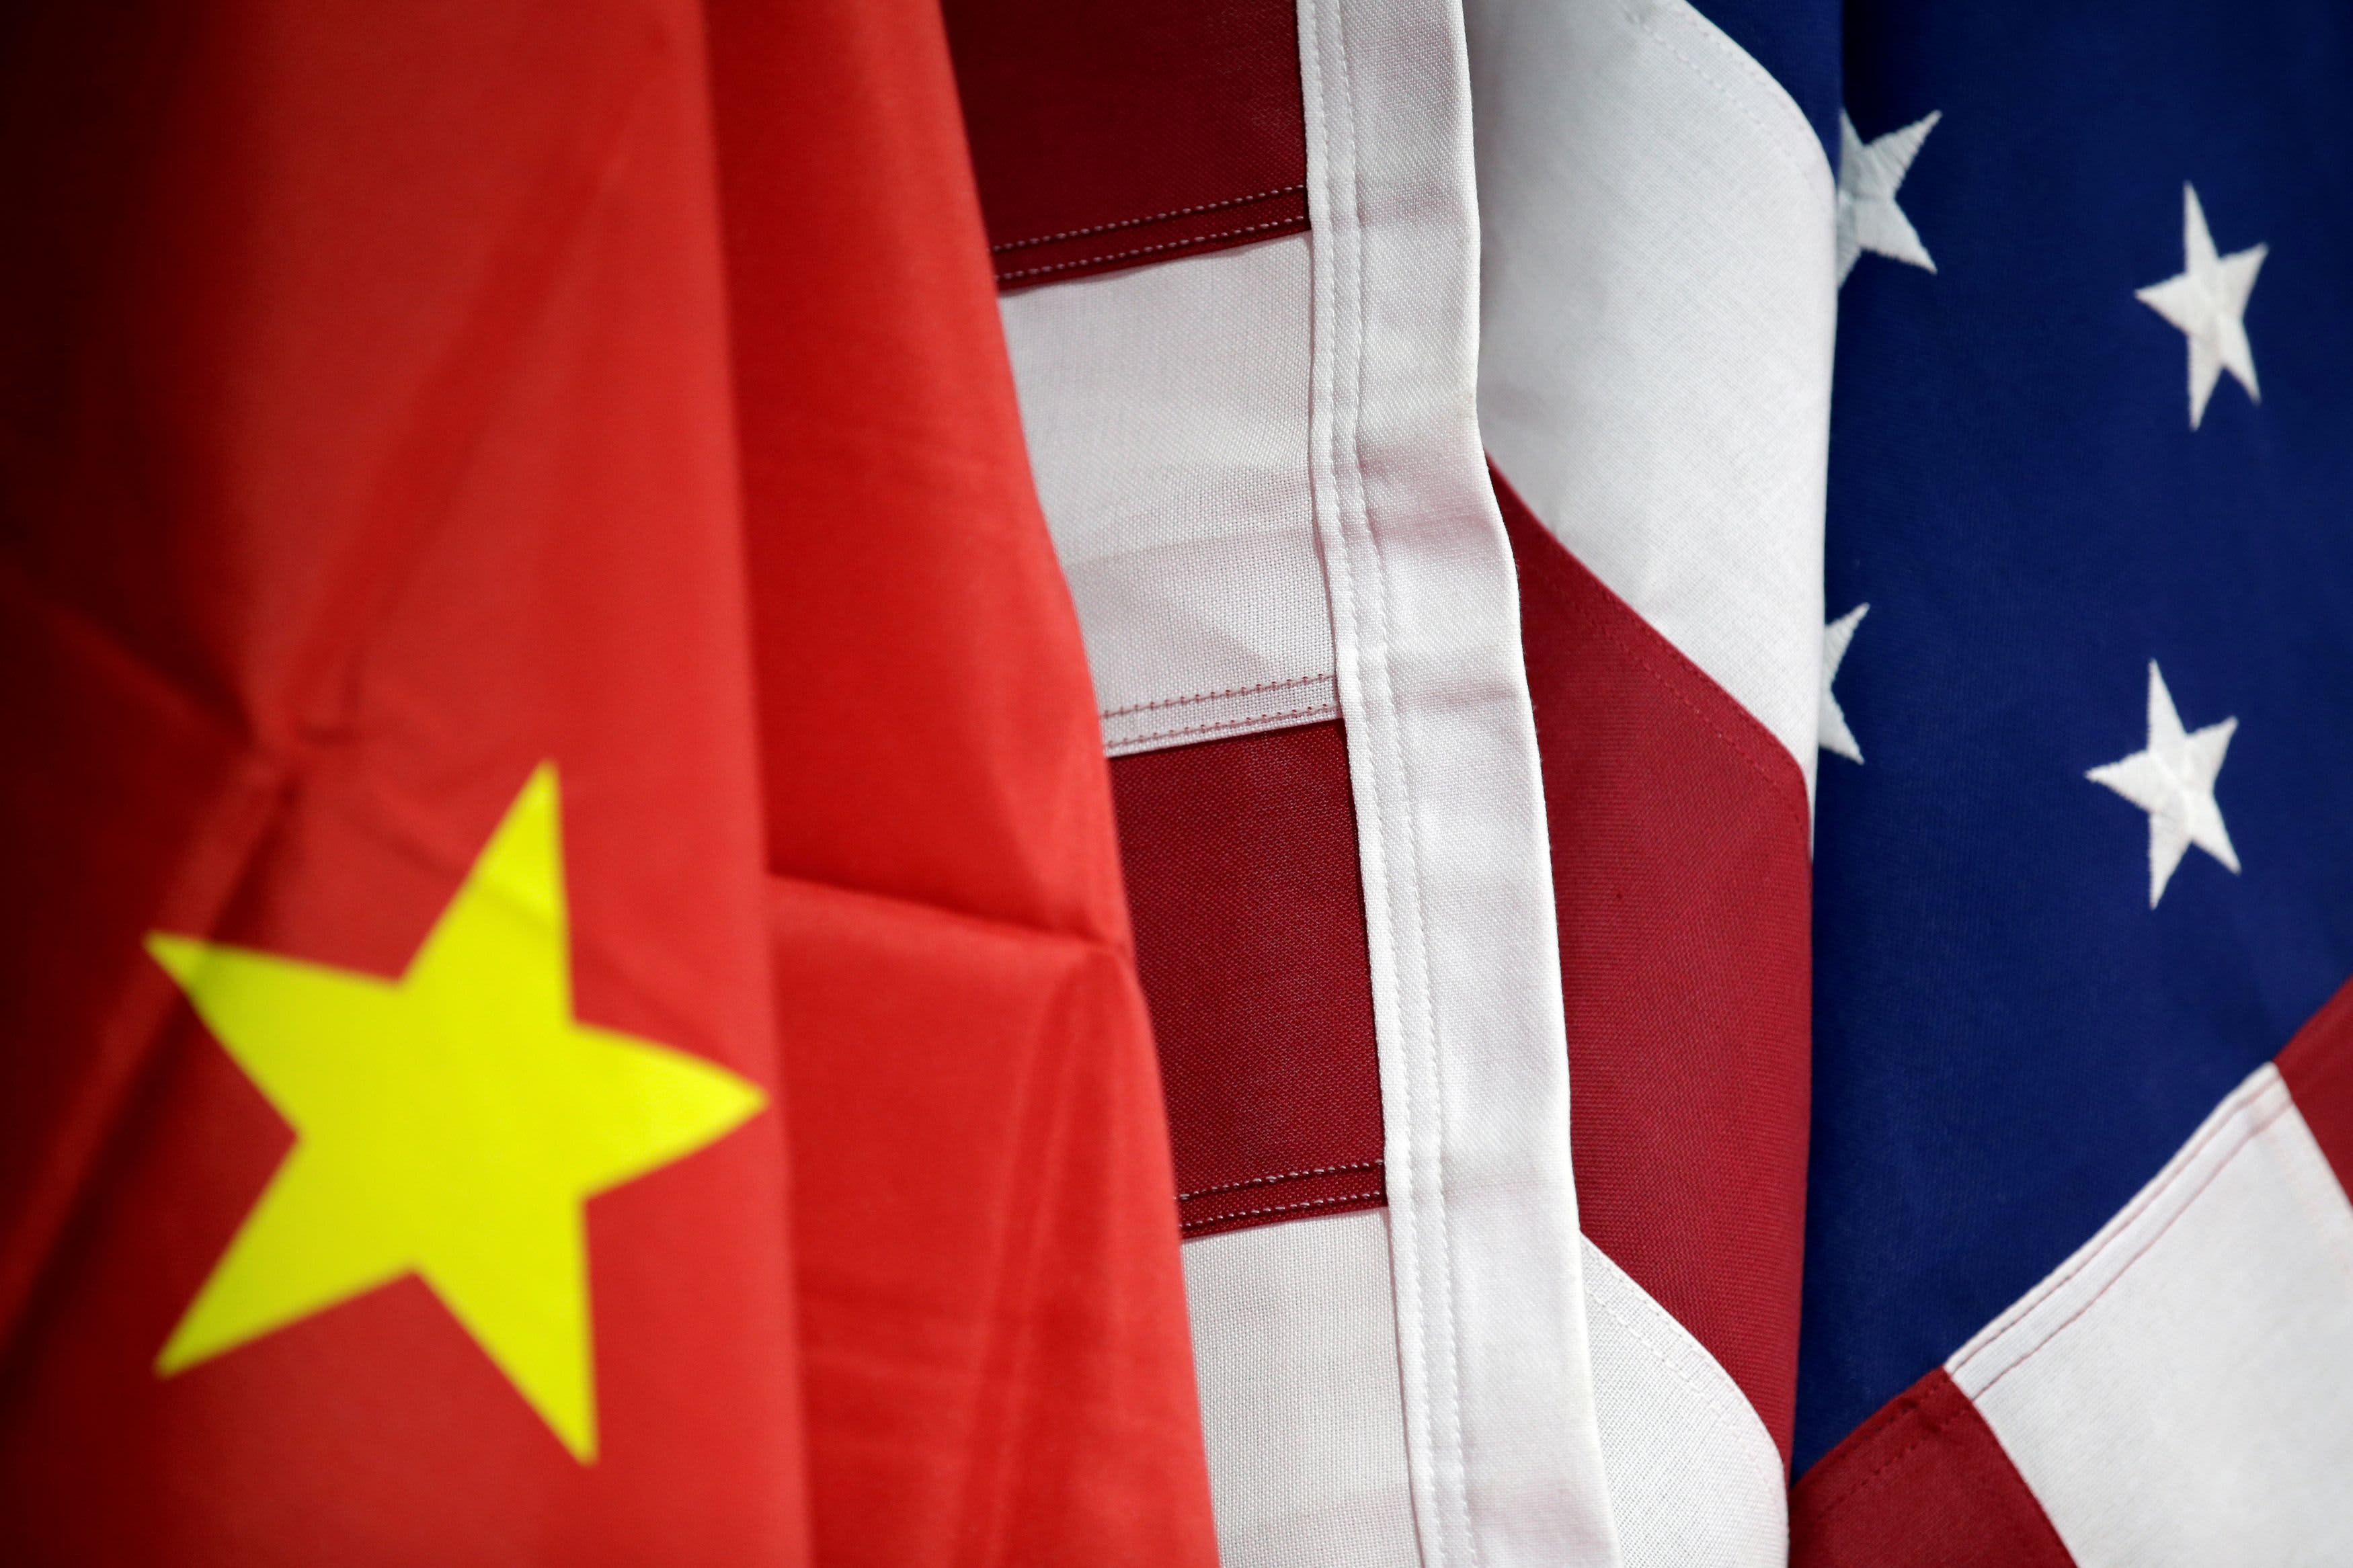 The disconnect between the US and China would cost America hundreds of billions of dollars